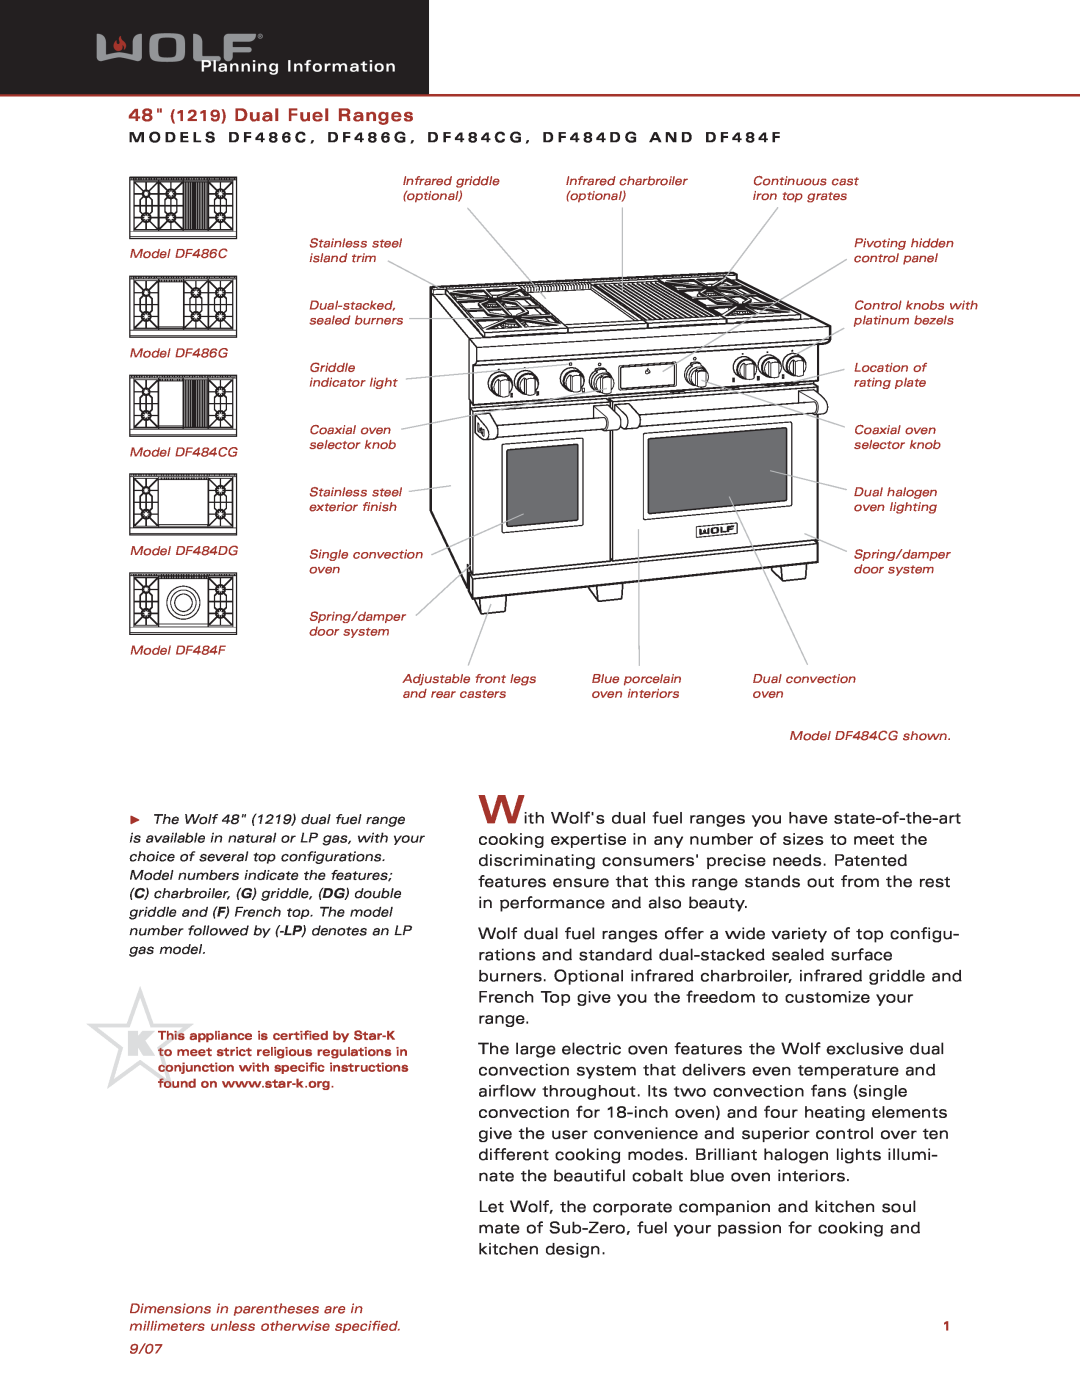 Wolf Appliance Company DF484CG, DF486G, DF484F, DF484DG, DF486C manual Dual Fuel Ranges, Surface Features, Accessories 